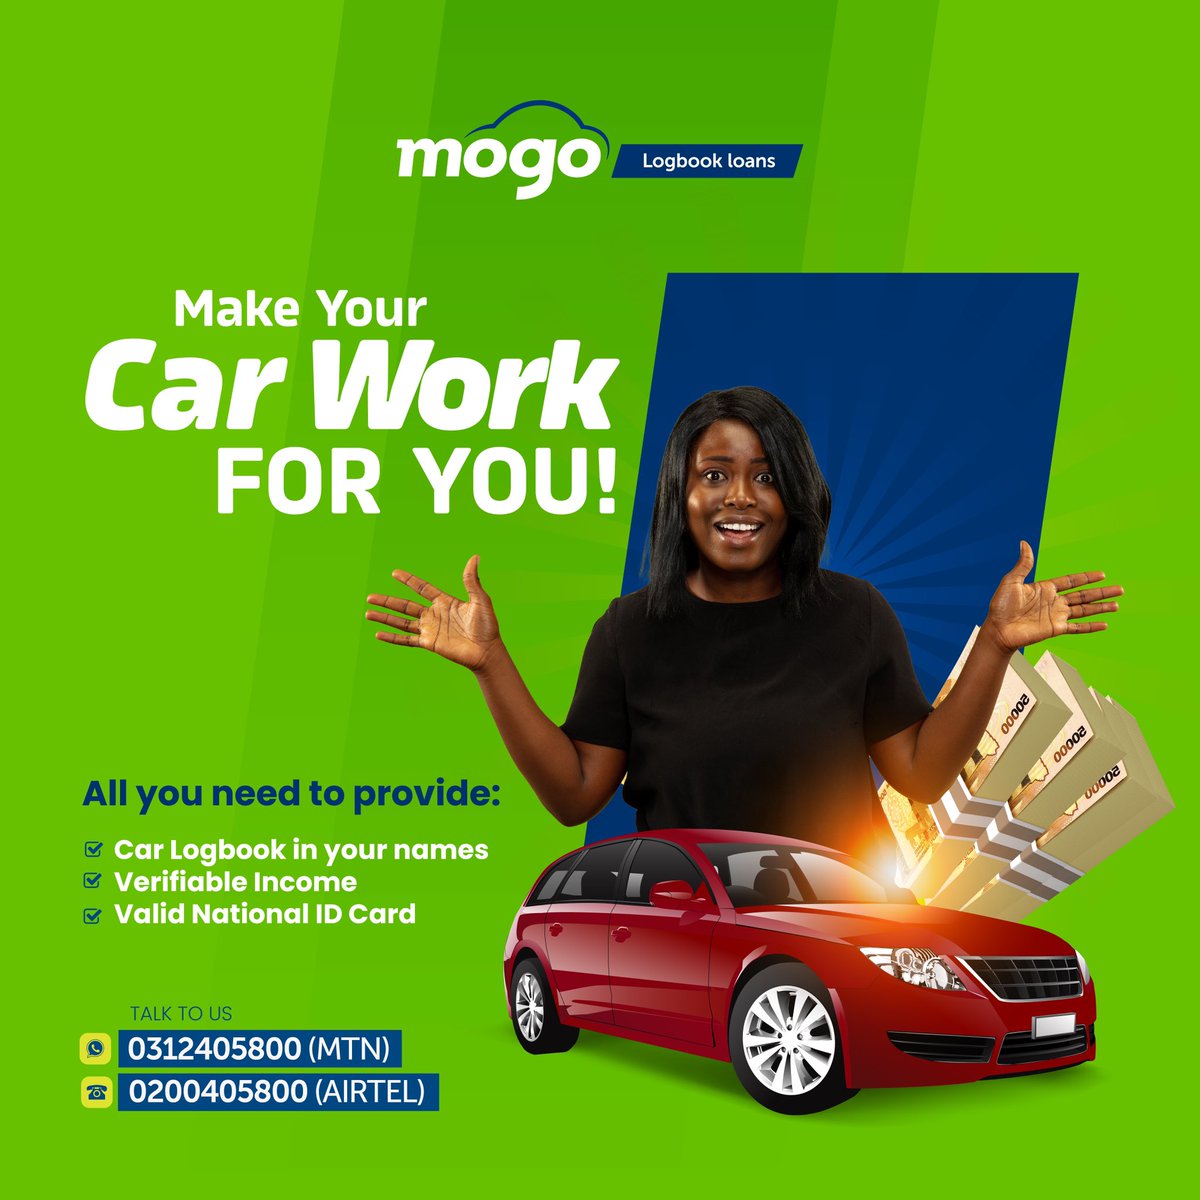 AD: Are you looking out for quick cash? Make your car work for you with a MOGO Logbook loan. Get up to 30 million shillings, payable in 36 months, and you keep driving your car. Apply via mogo.co.ug/logbook-loans